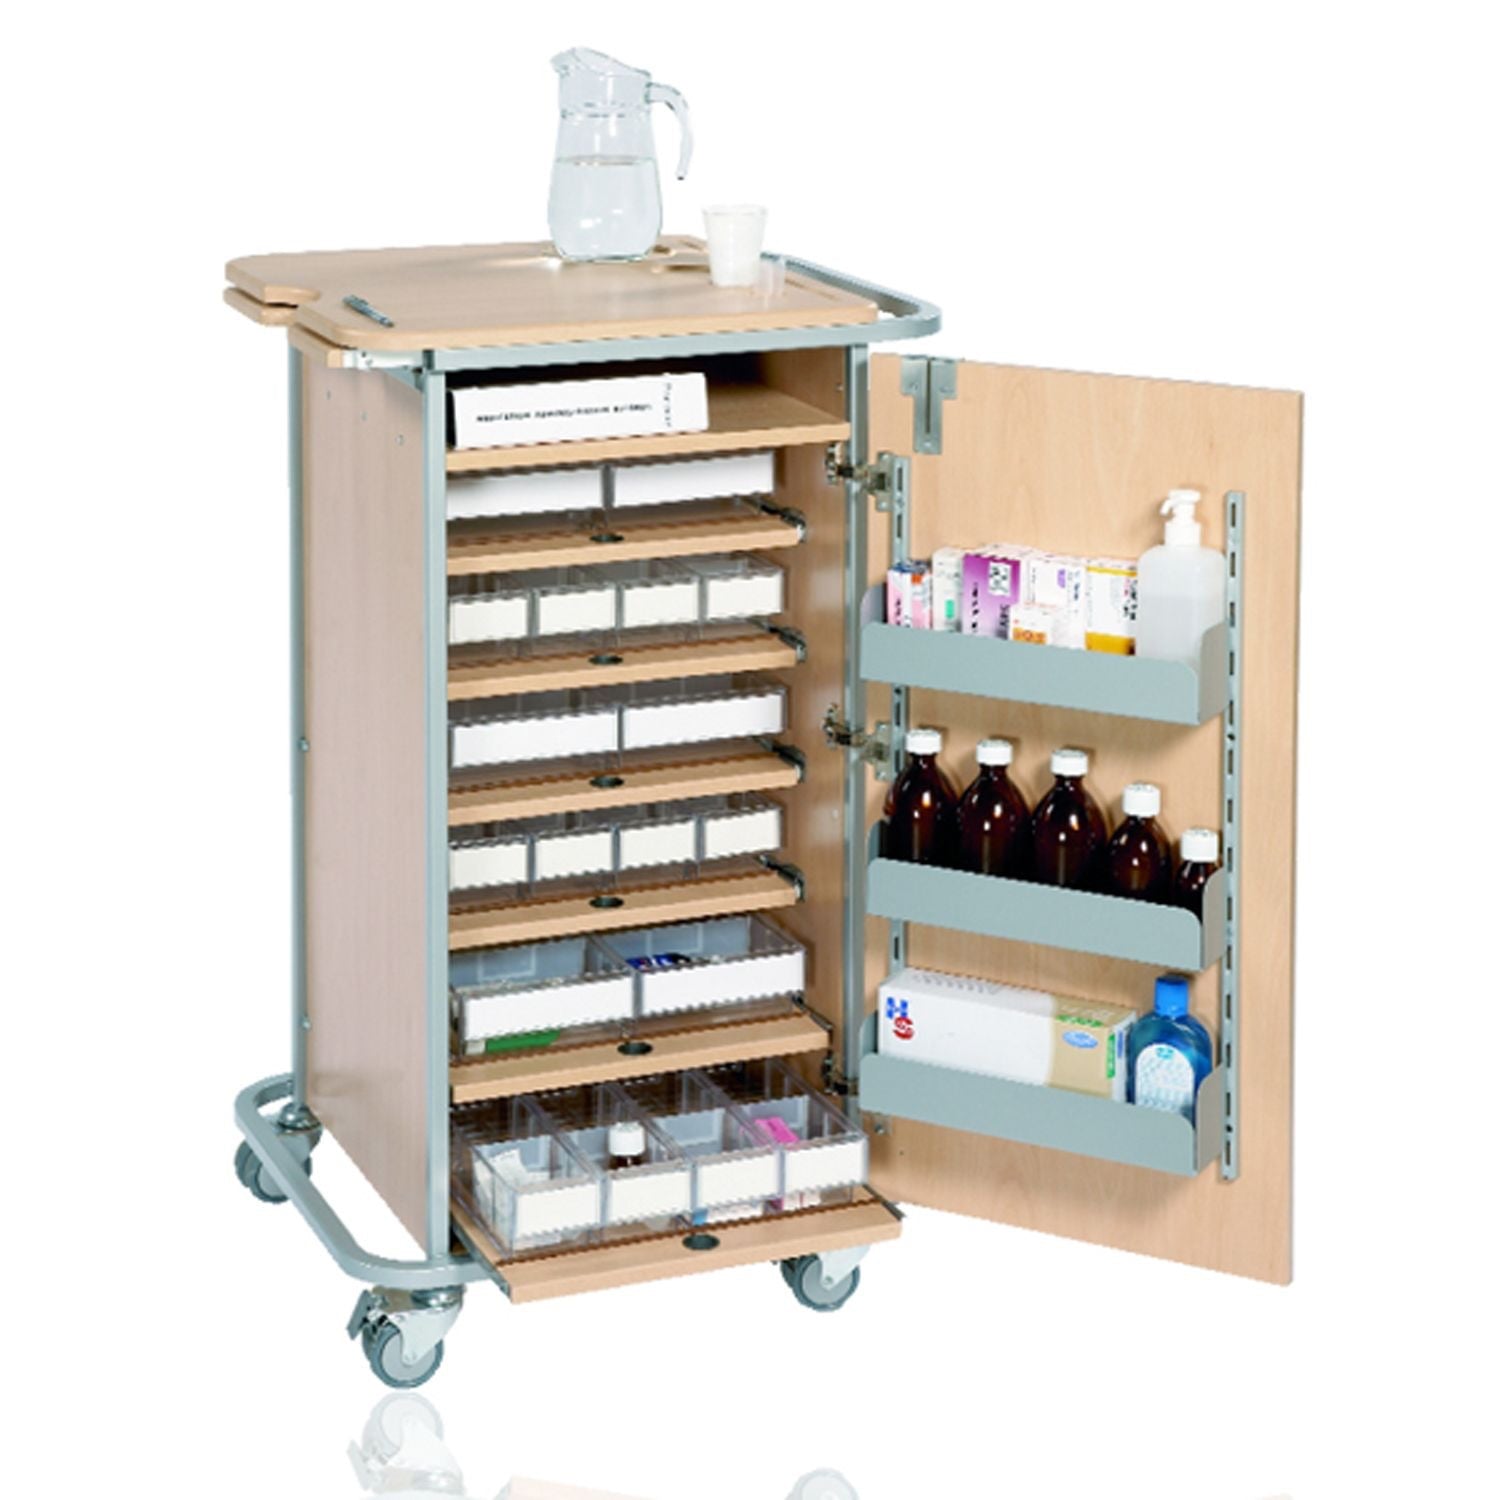 Sunflower Dosage System Small DT7/UDS Capacity & Storage Trolley